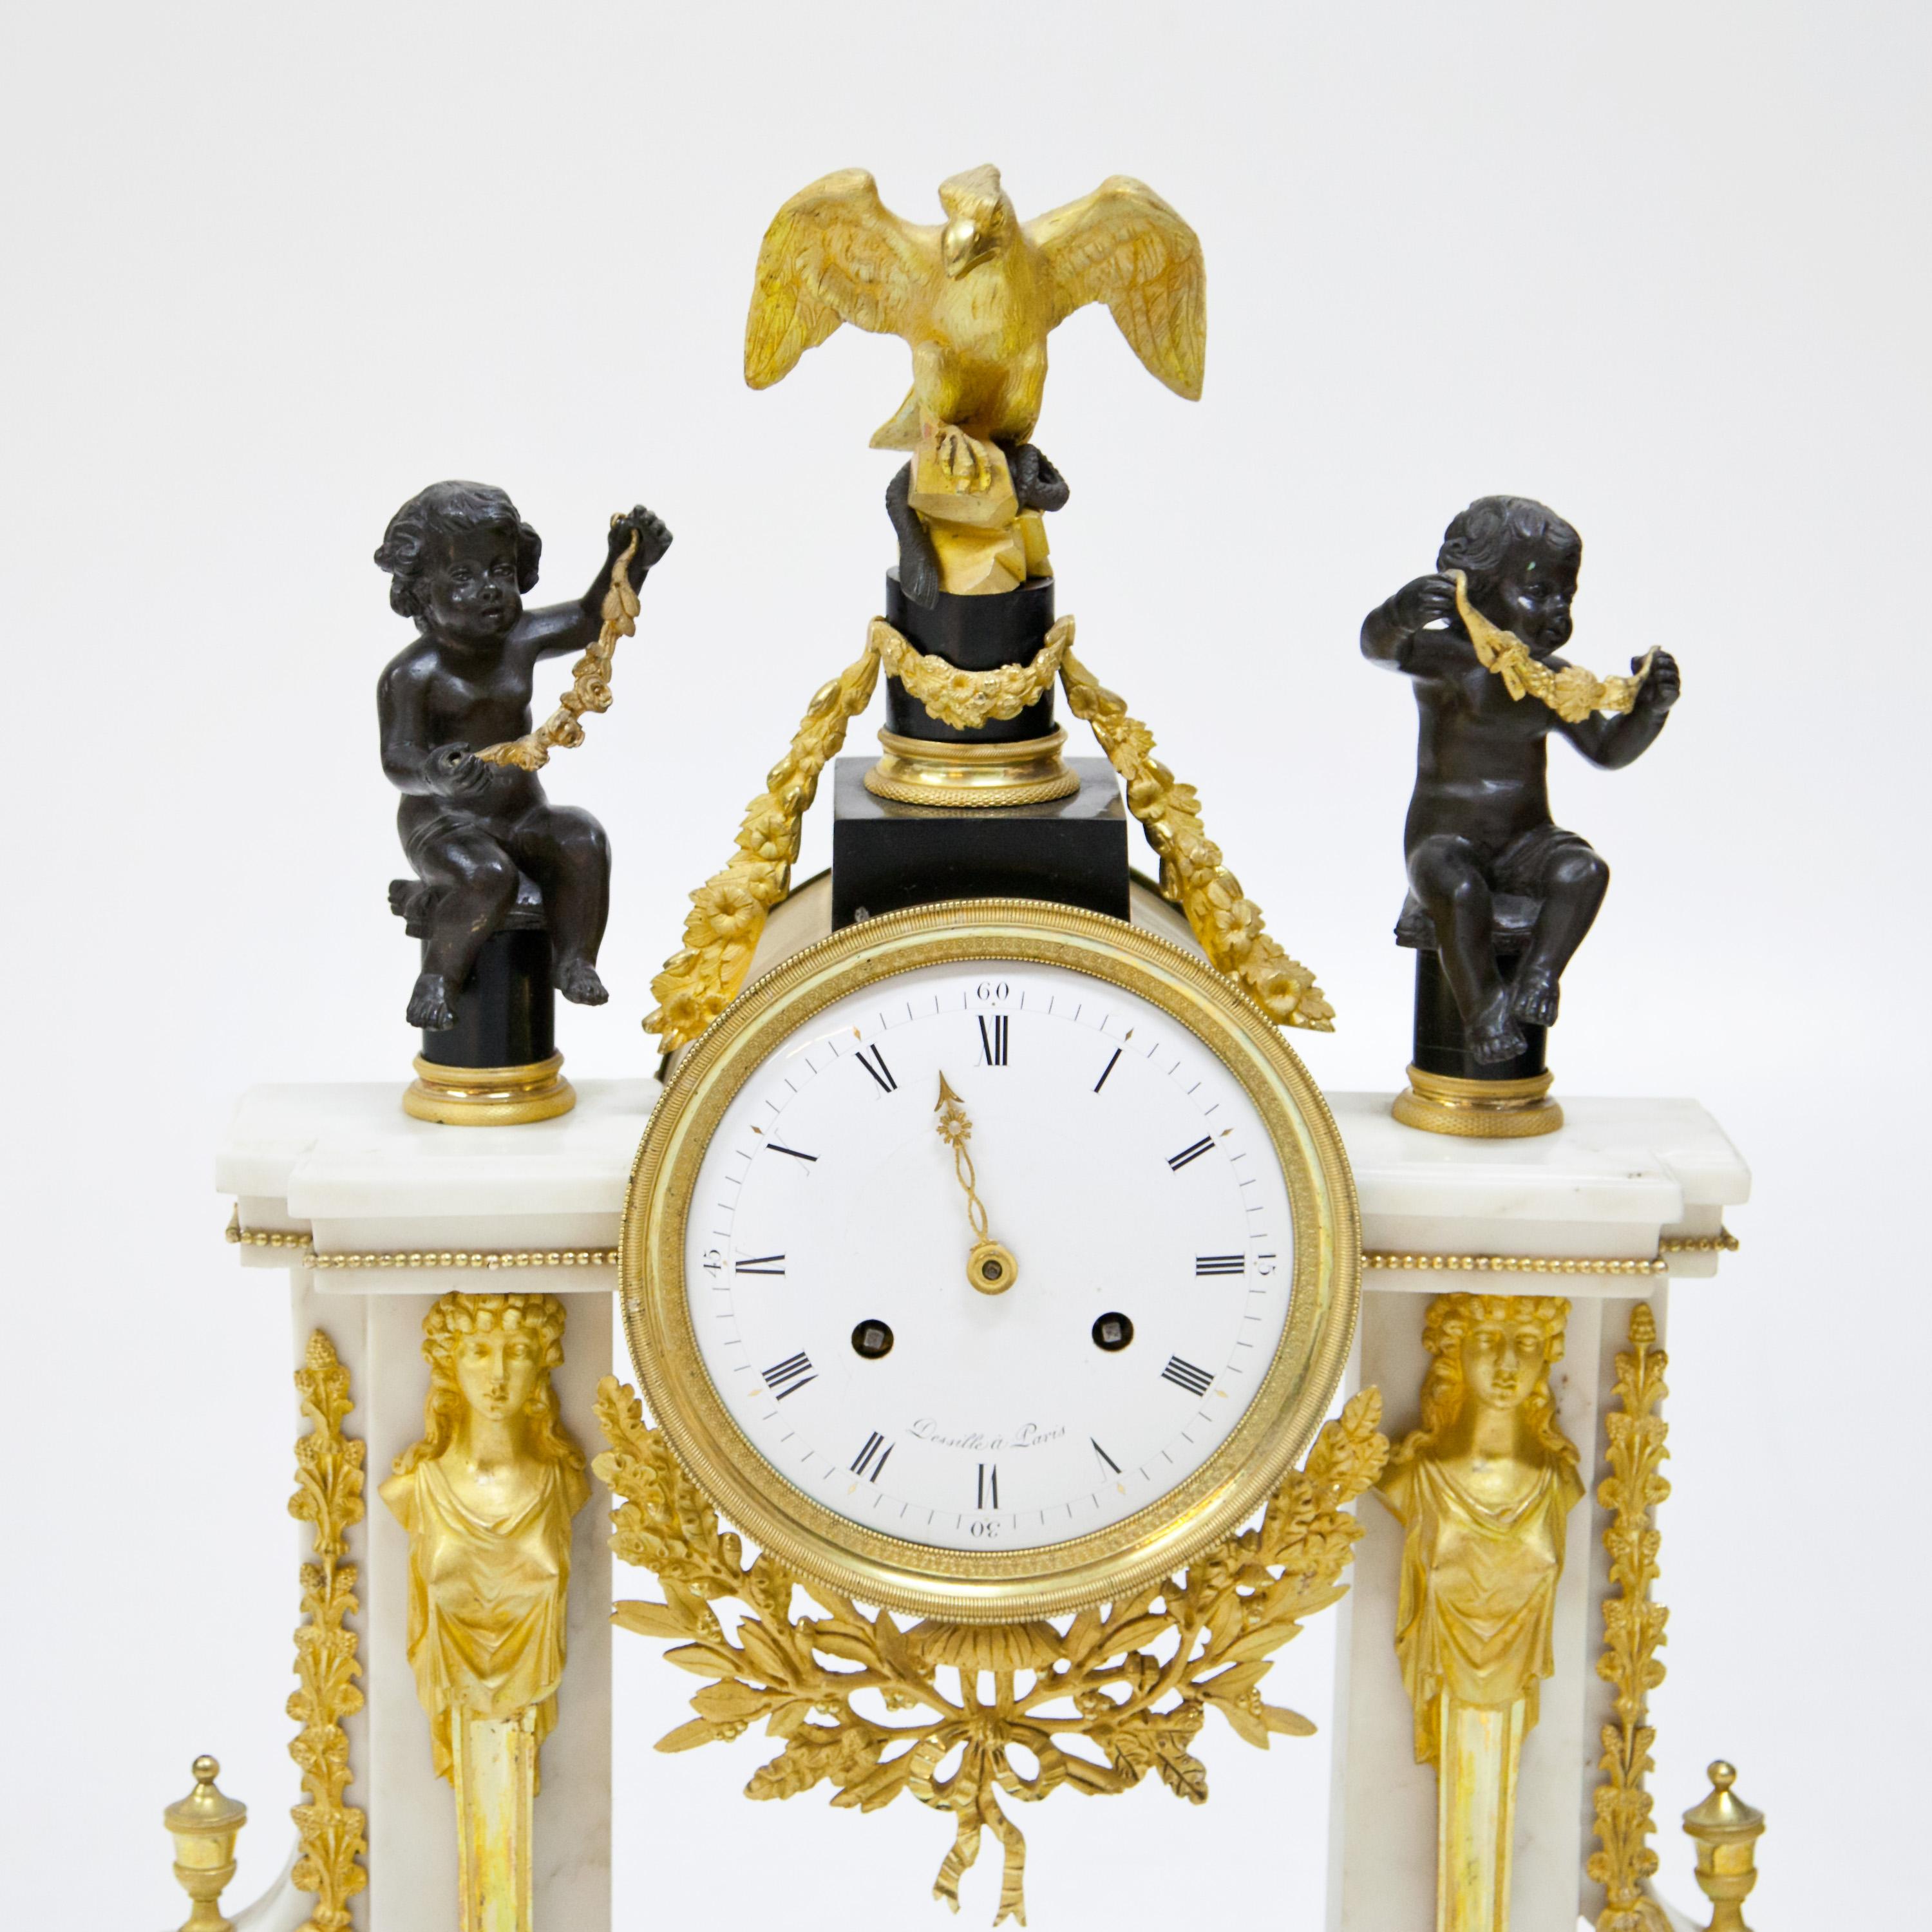 Louis Seize portal clock with fully plastic eagle and putti decoration. The portal is flanked by caryatids and the volutes are decorated with urns and garlands in fire-gilded bronze. The clock has a contrasting design with a portal in white and a